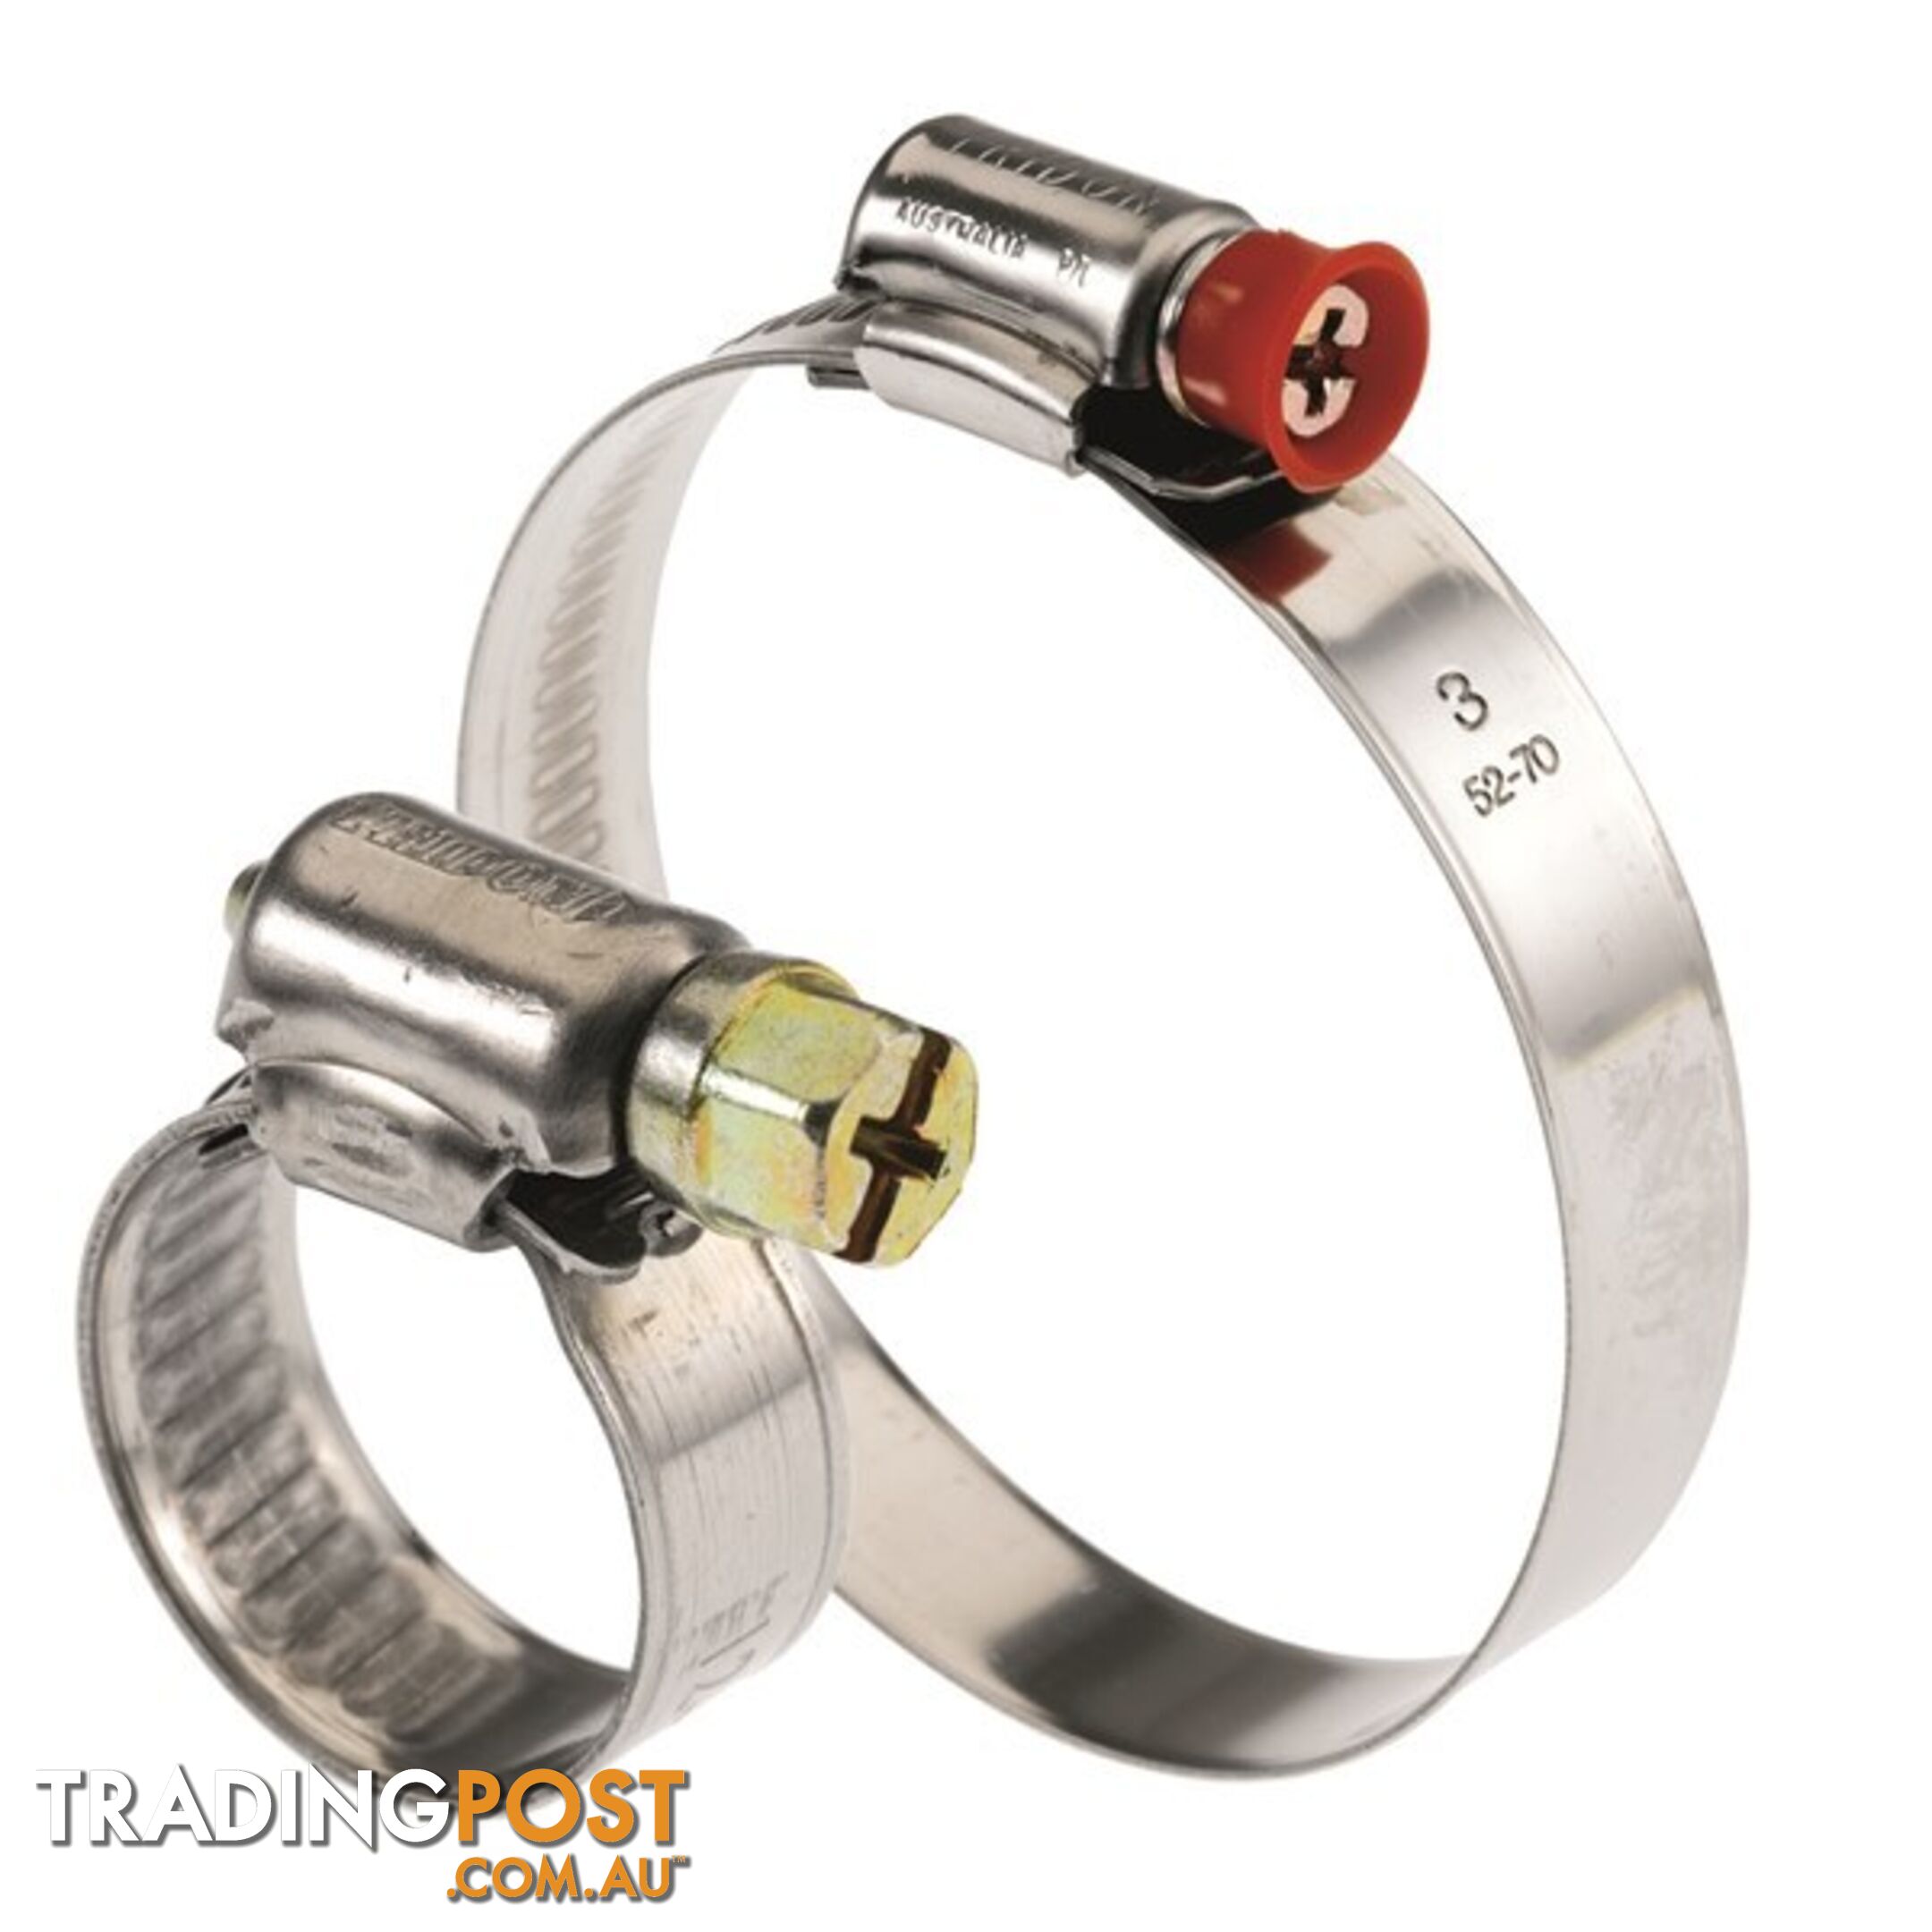 Tridon Part S.S Hose Clamp 16mm-24mm Multi Purpose Solid Micro Band 10pk SKU - MP0AP